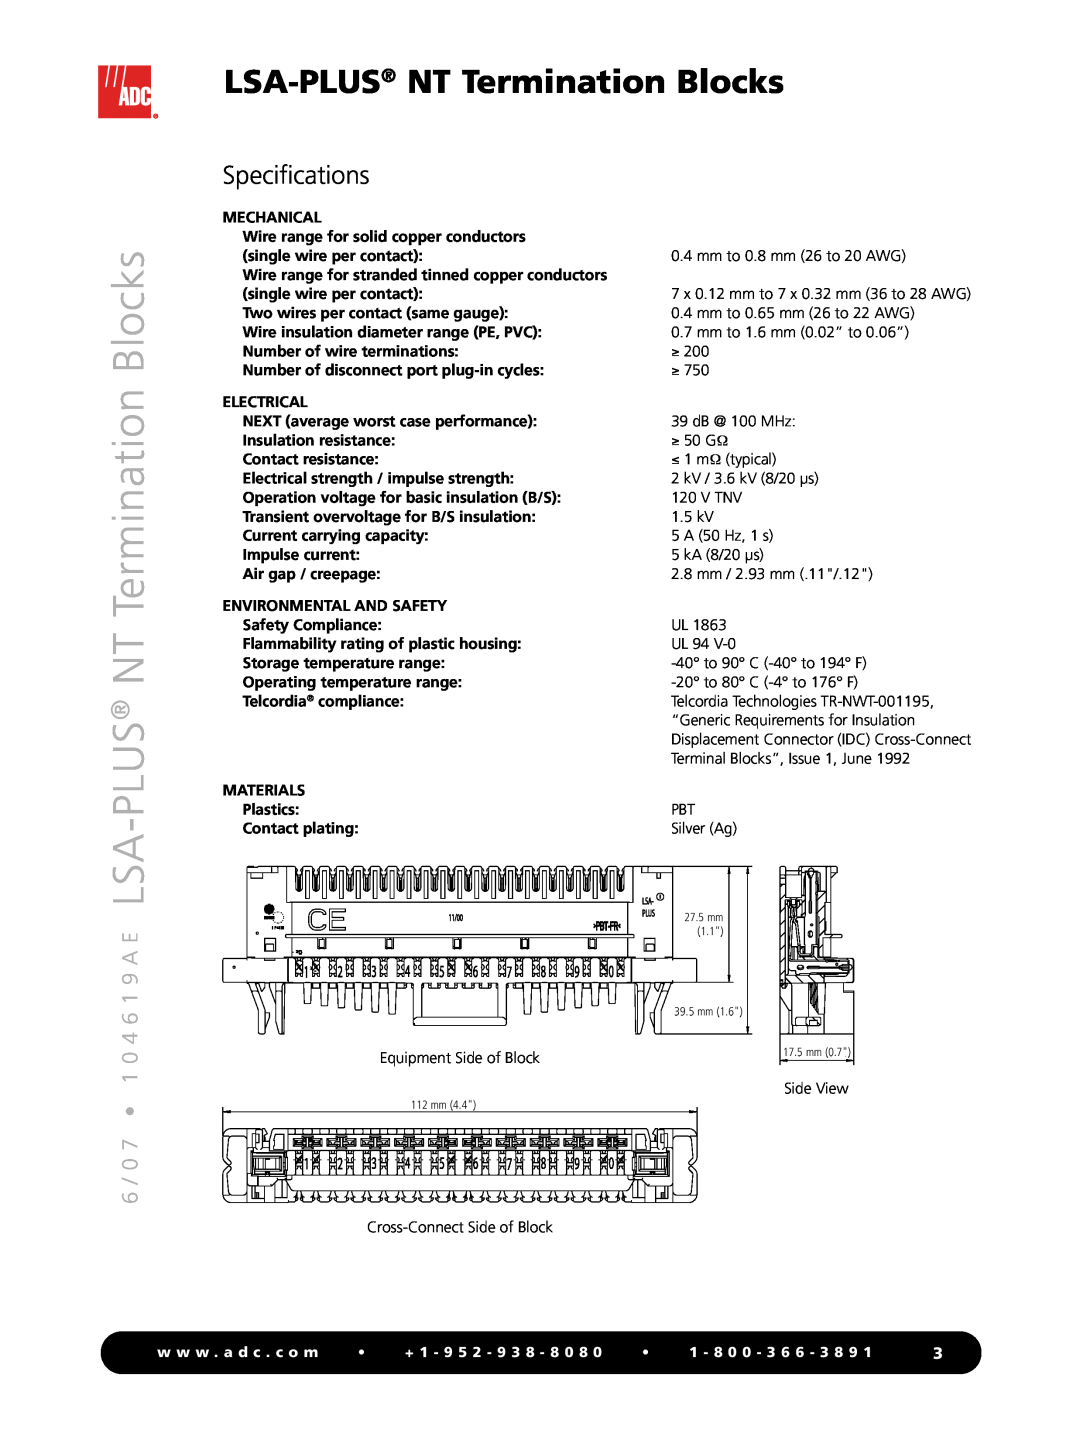 ADC manual 6 / 0 7 1 0 4 6 1 9 A E LSA-PLUS NT Termination Blocks, Specifications, w w w . a d c . c o m 